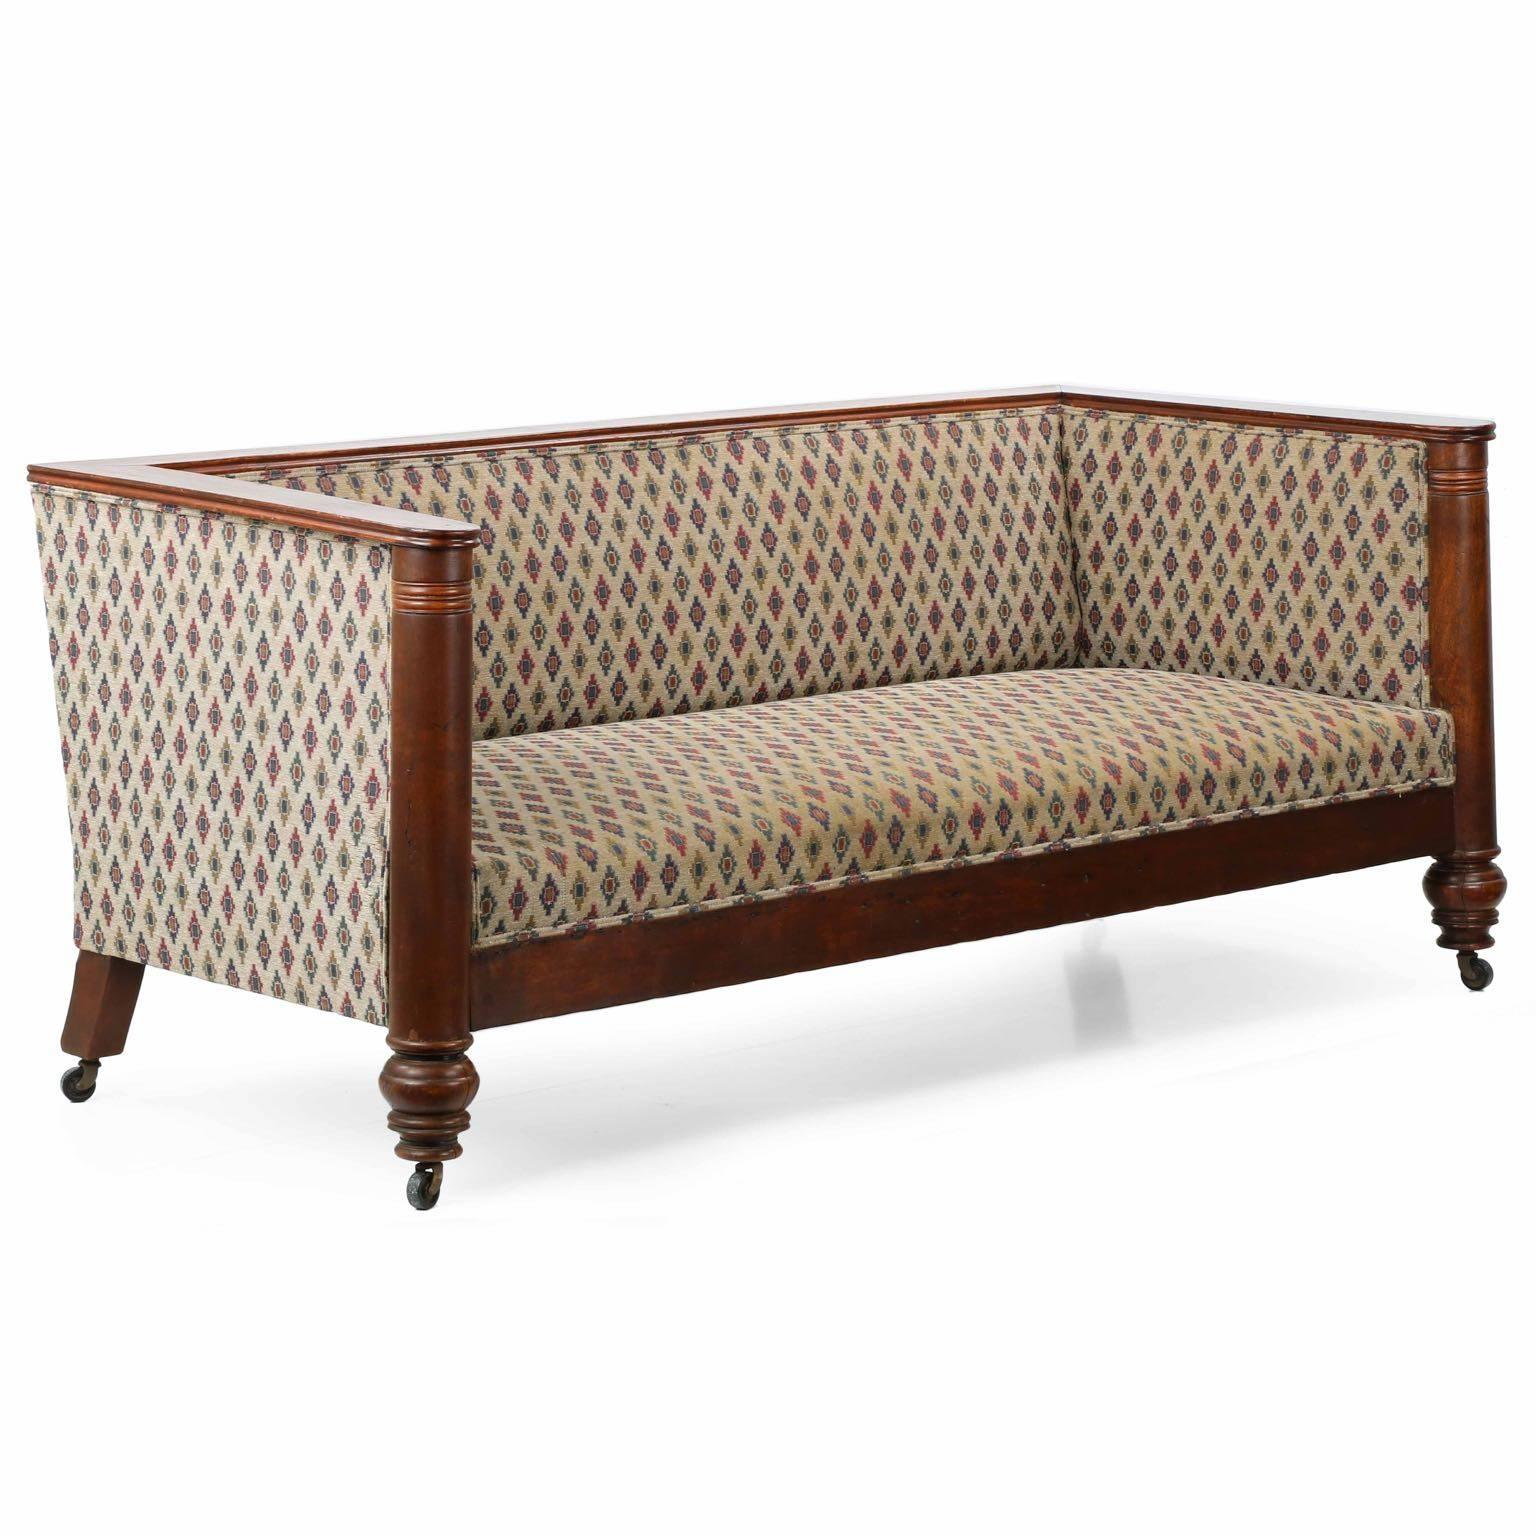 A very interesting form, striking and angular, this Empire box-form sofa is an interesting display of bold proportions and materials so commonly associated with the period.  Crafted during the last quarter of the 19th century, probably in America